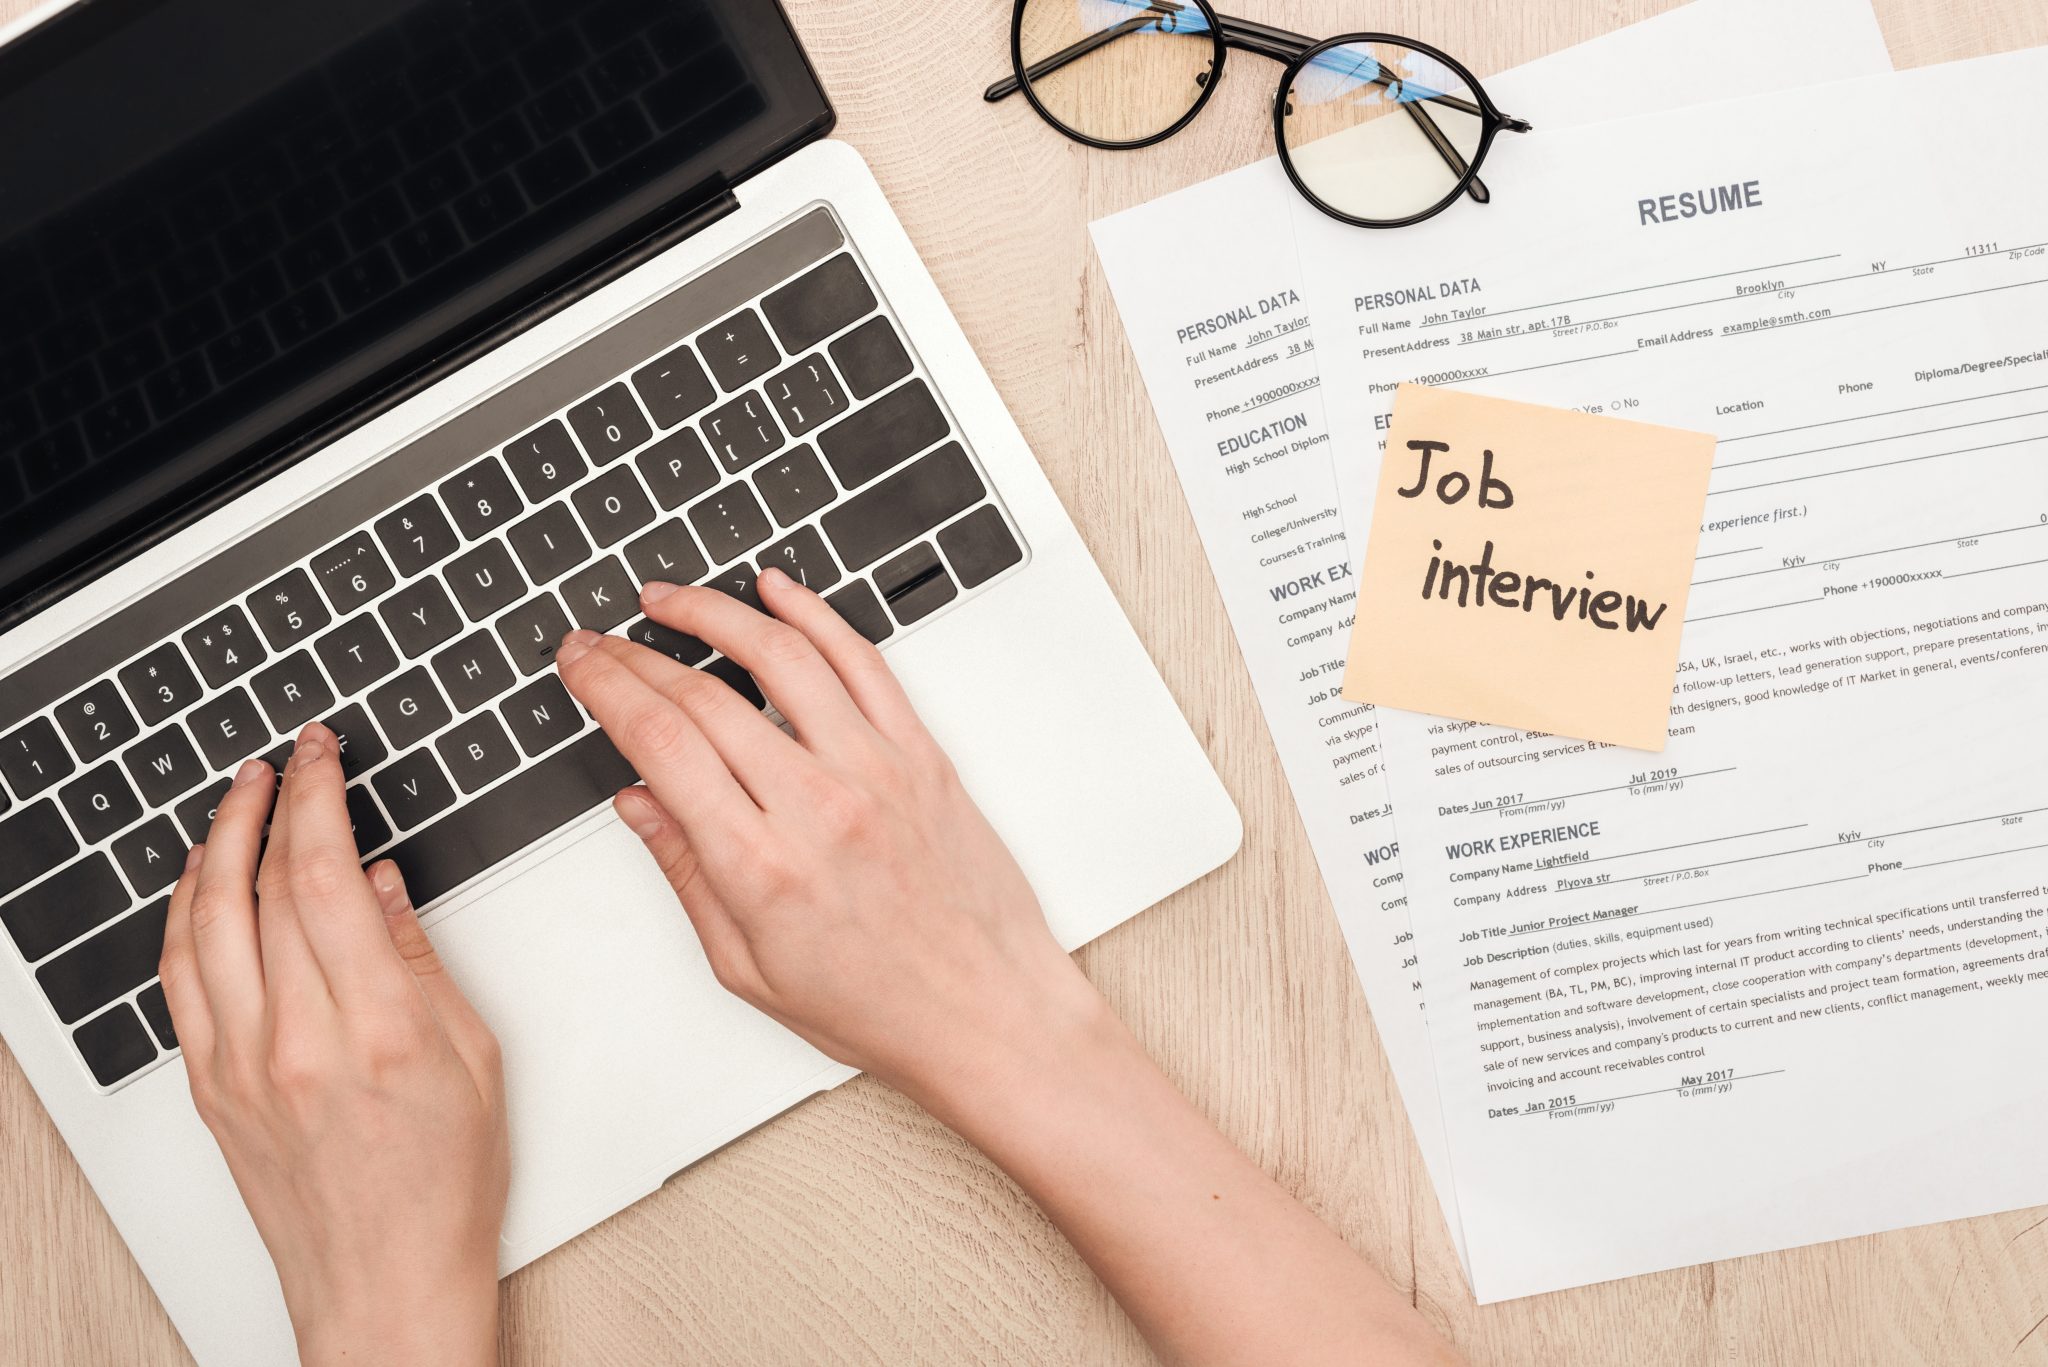 101 Tips For Finding A New Job